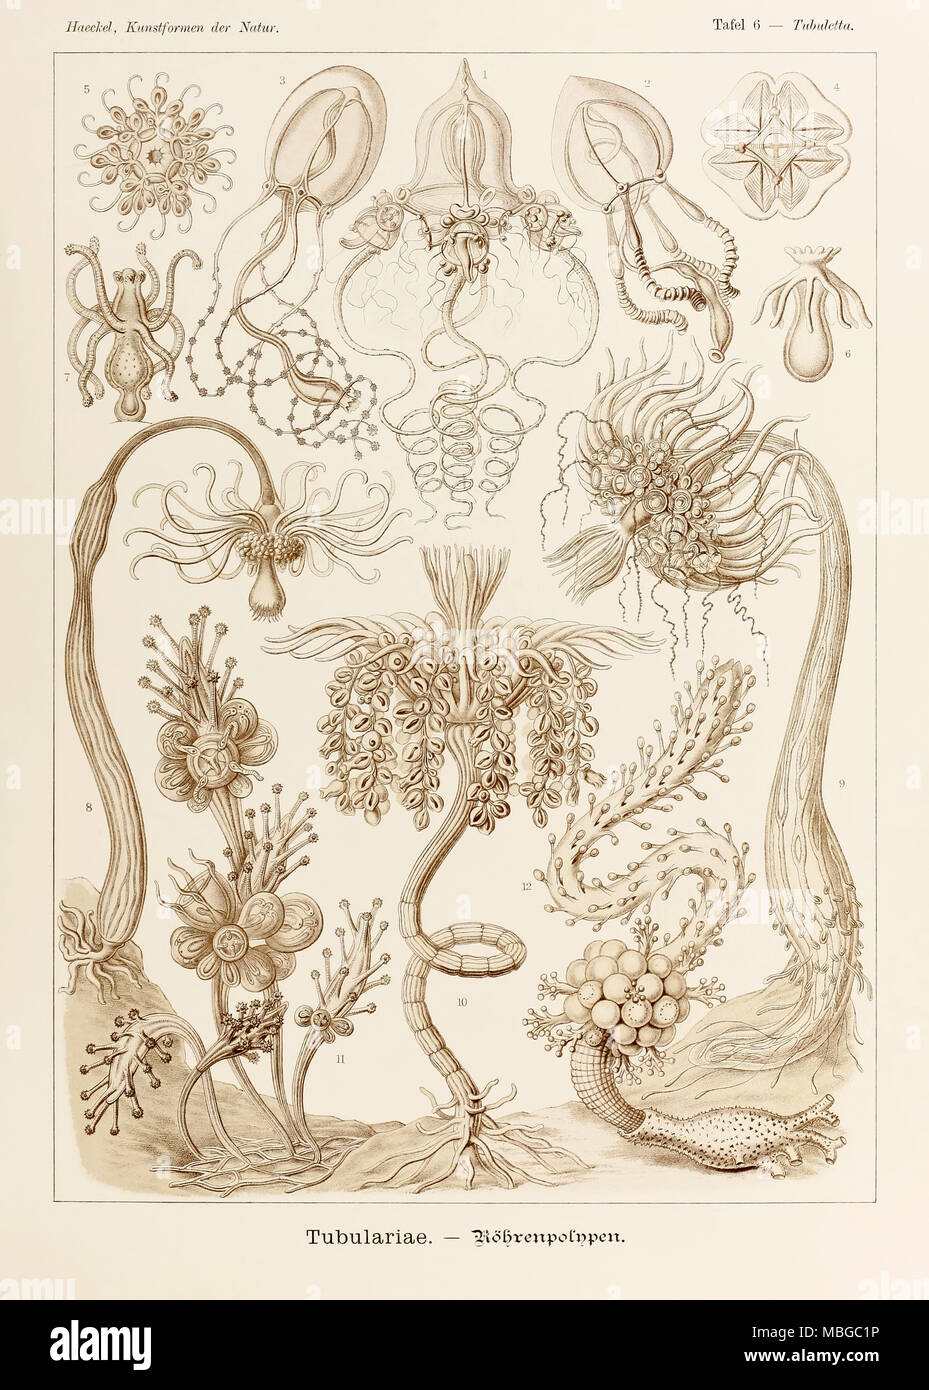 Plate 6 Tubuletta Tubulariae from ‘Kunstformen der Natur’ (Art Forms in Nature) illustrated by Ernst Haeckel (1834-1919). See more information below. Stock Photo